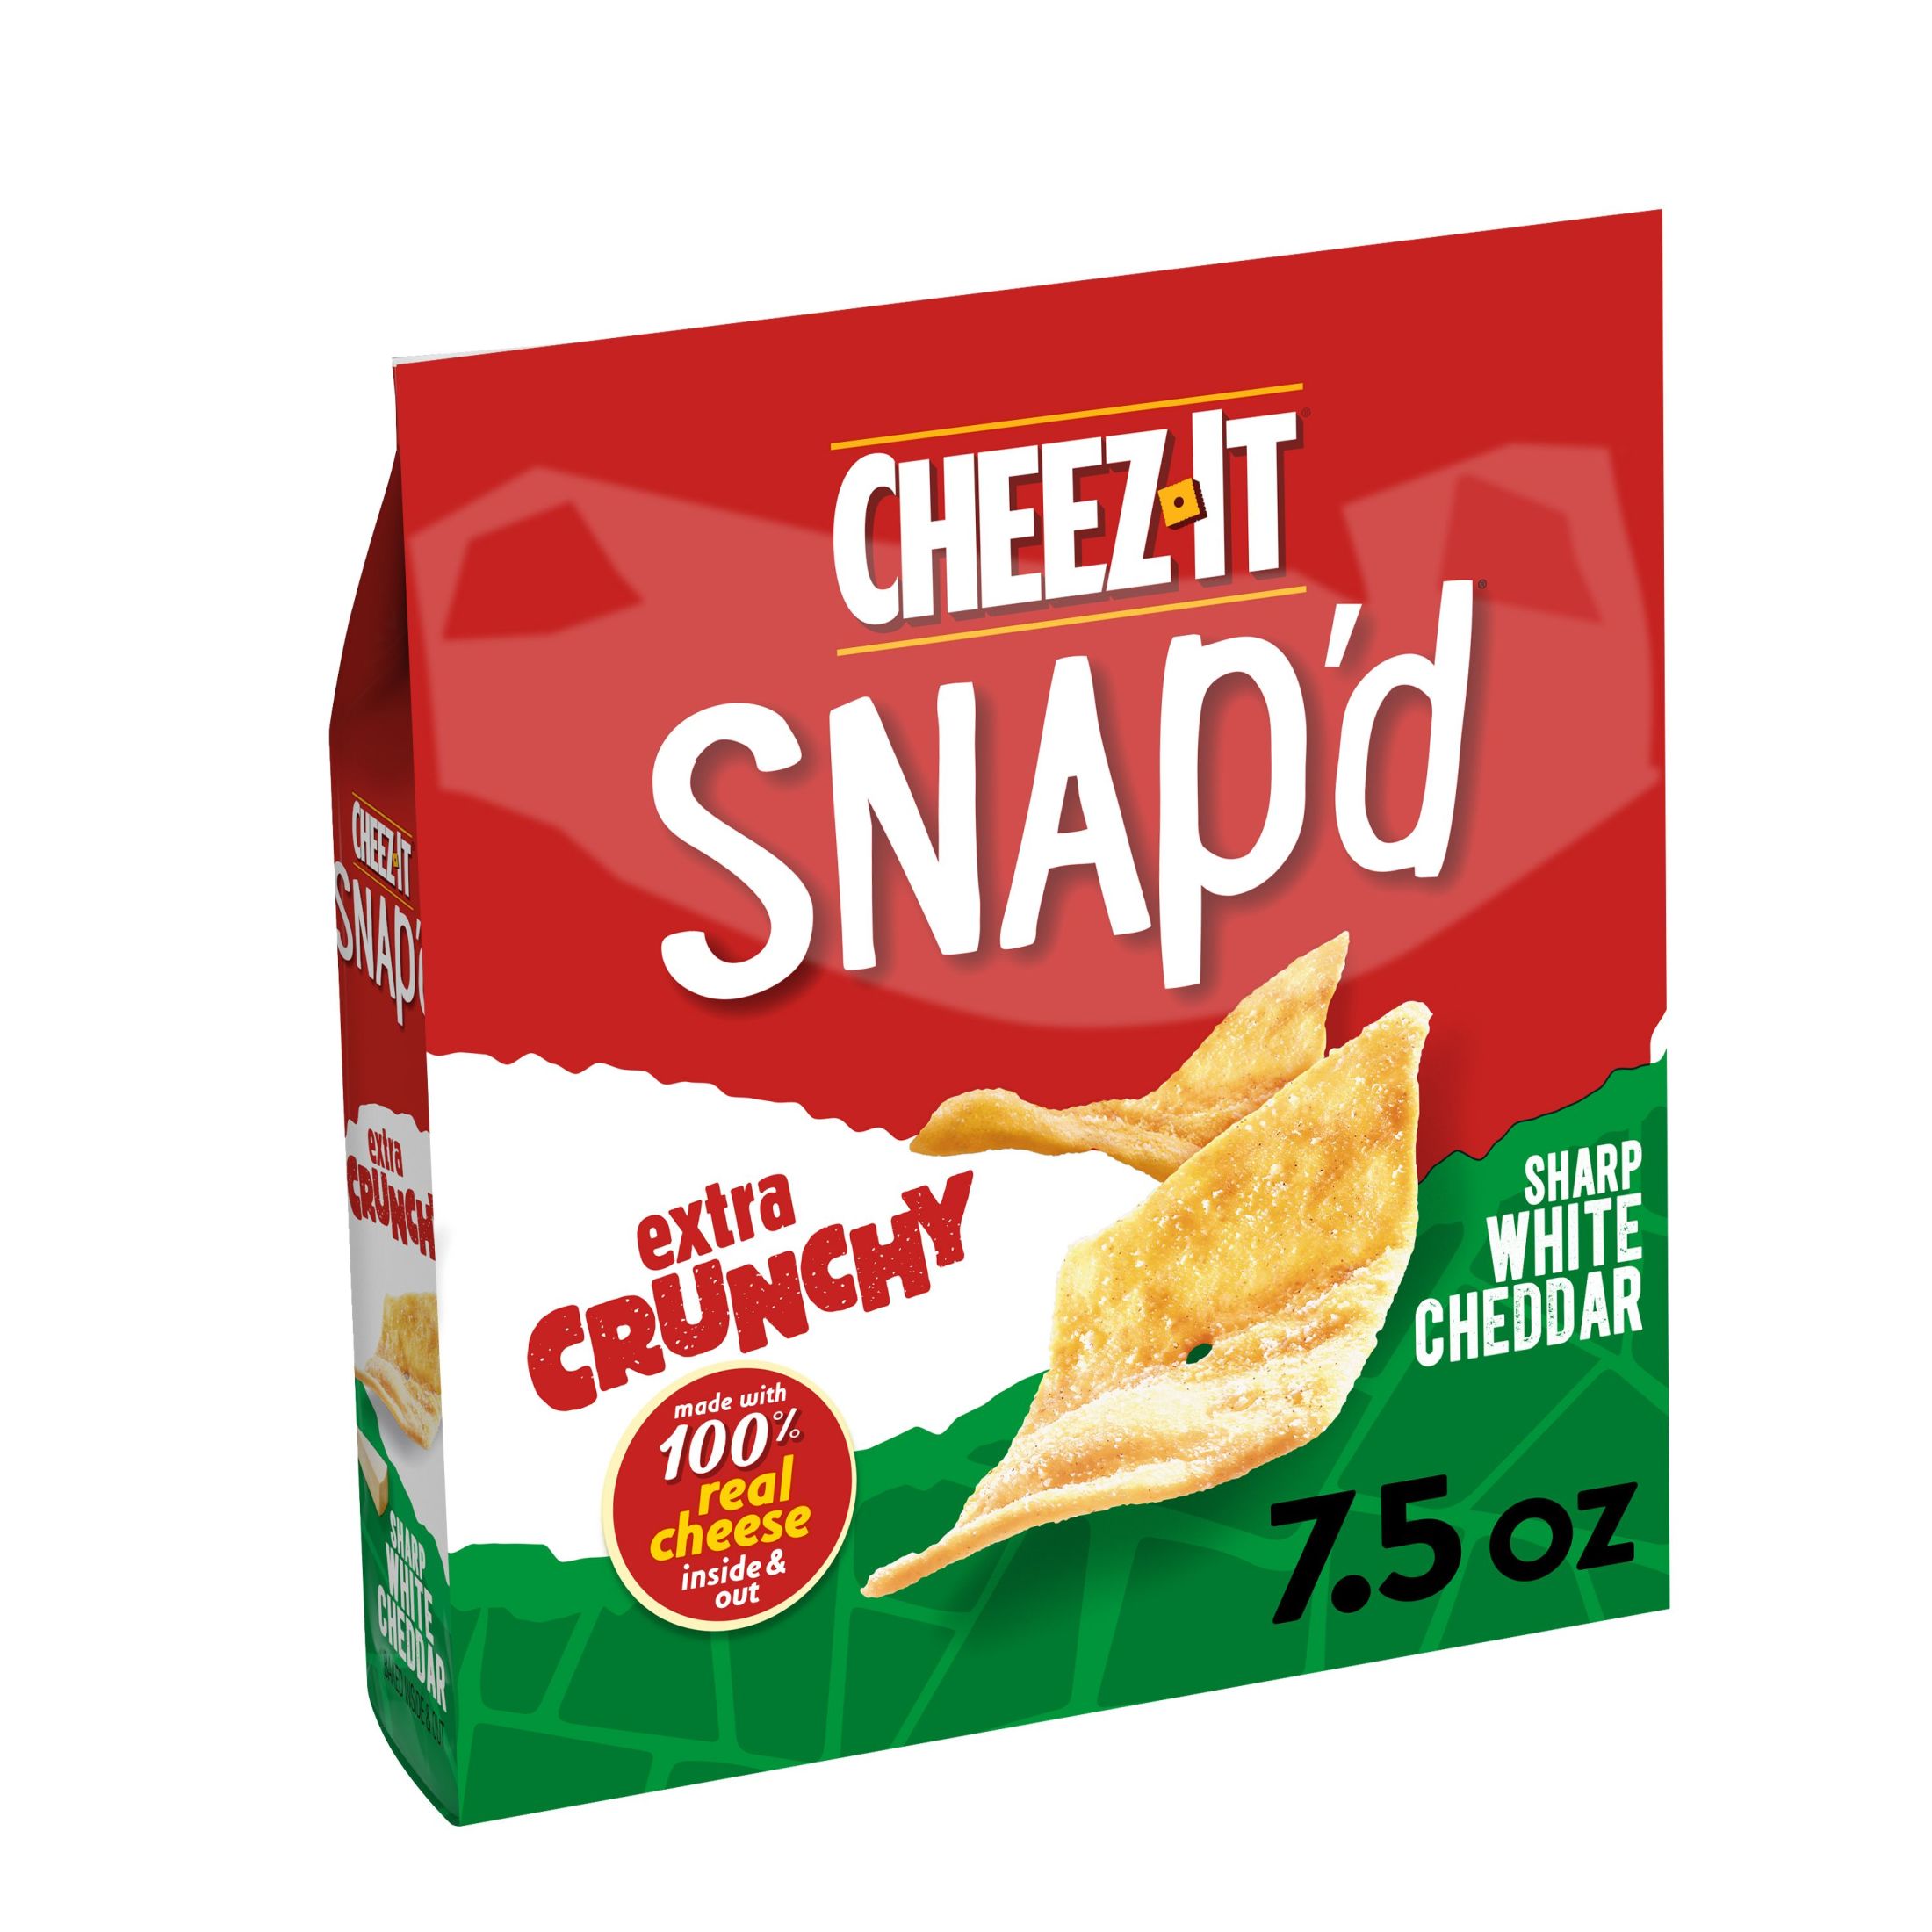 Cheez-It Snap'd Sharp White Cheddar Cheese Cracker Chips, Thin Crisps, 7.5 oz - image 1 of 8